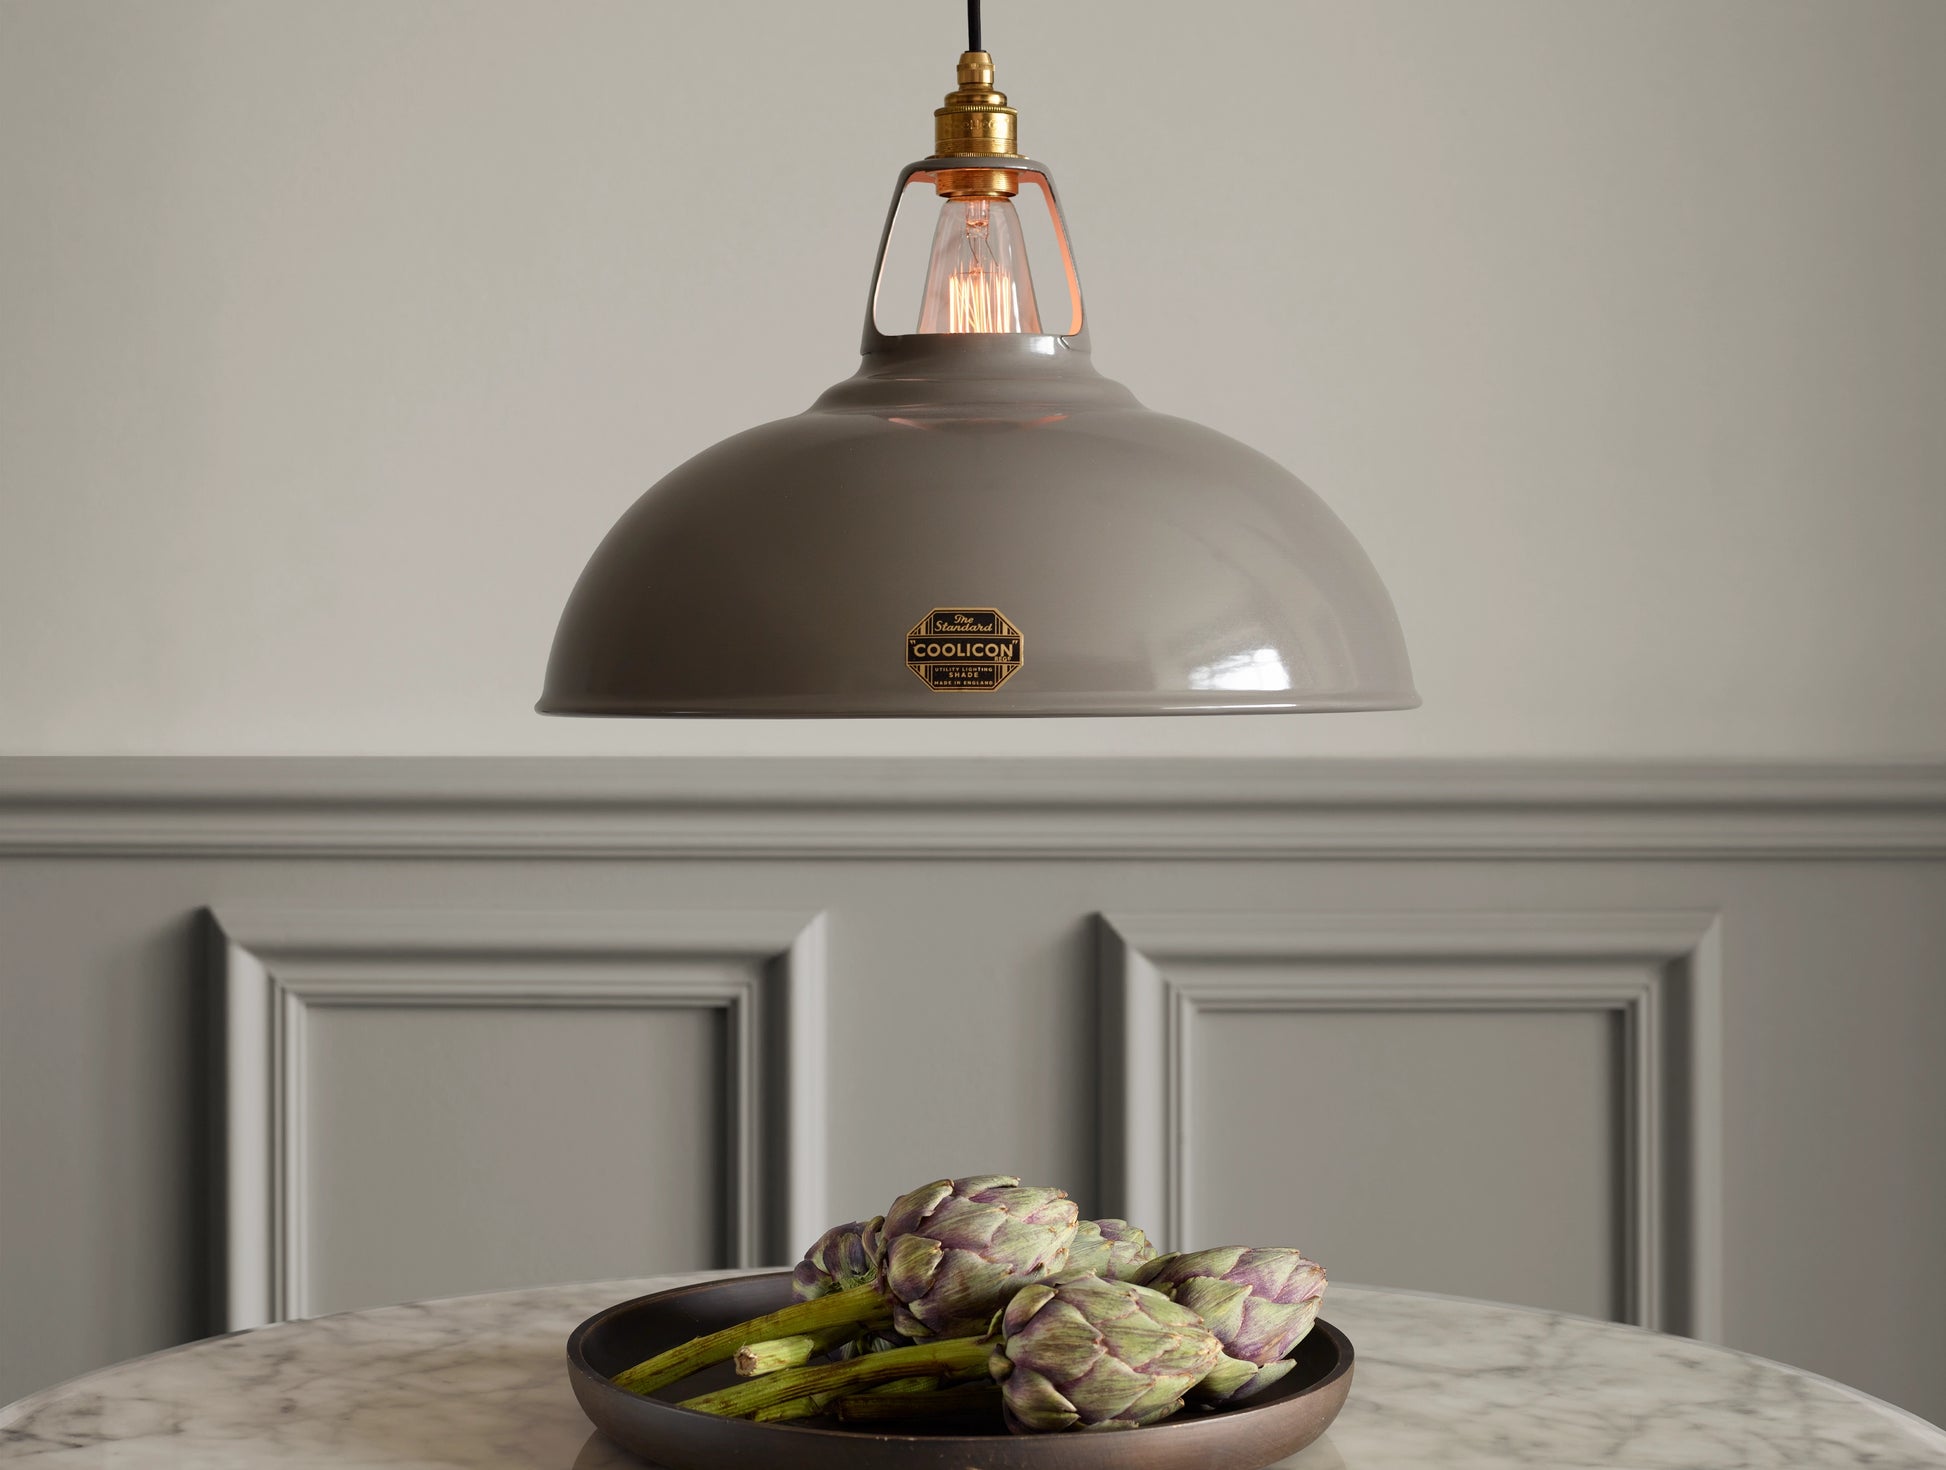 A Large Coolicon Original Grey lampshade hanging over a marble table. Below there is a grey tray with a few artichokes stems